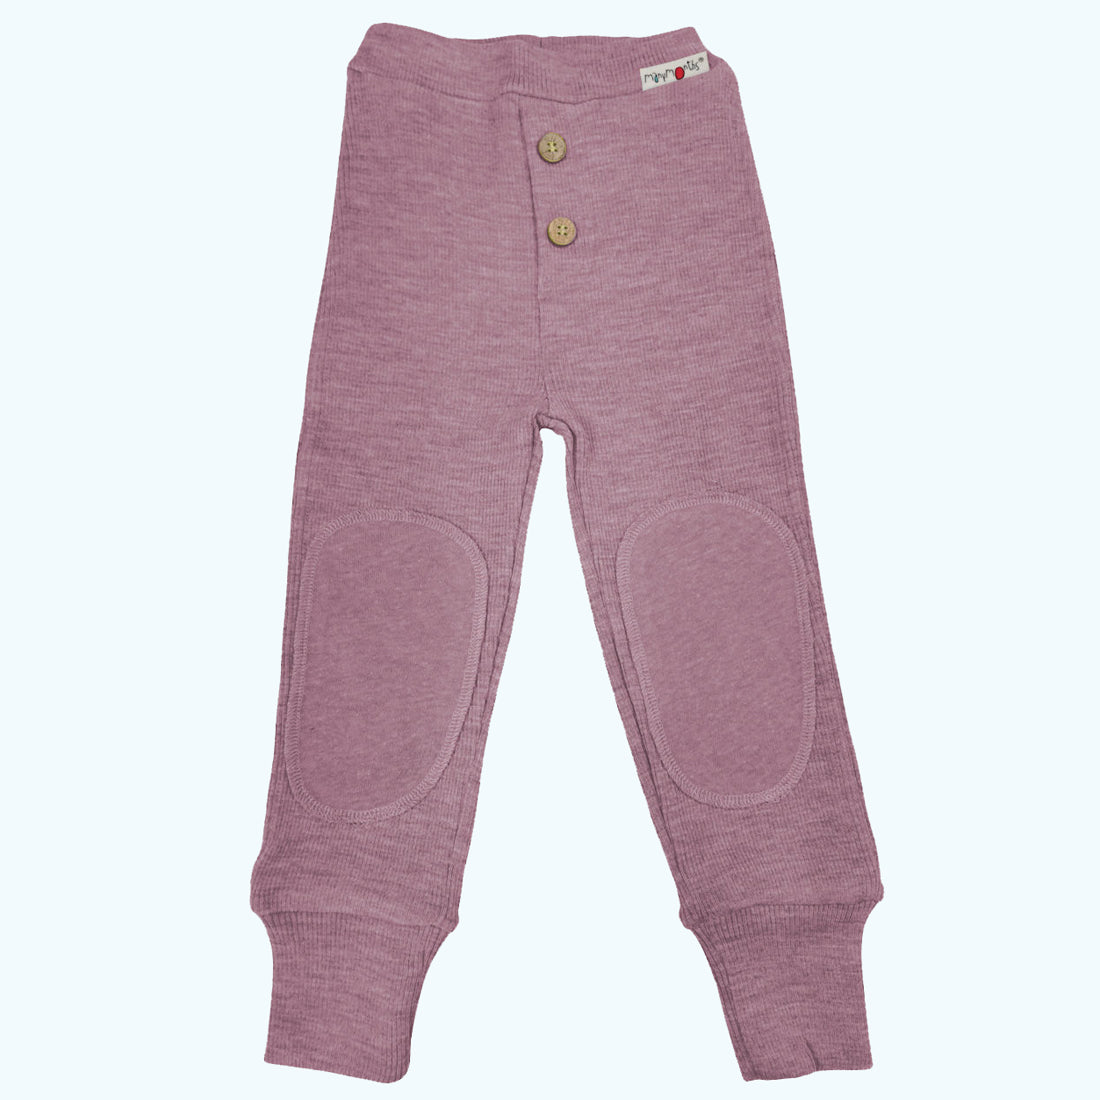 ManyMonths® Natural Woollies Baby Joggers with Reinforced Knees - NEW Colors!